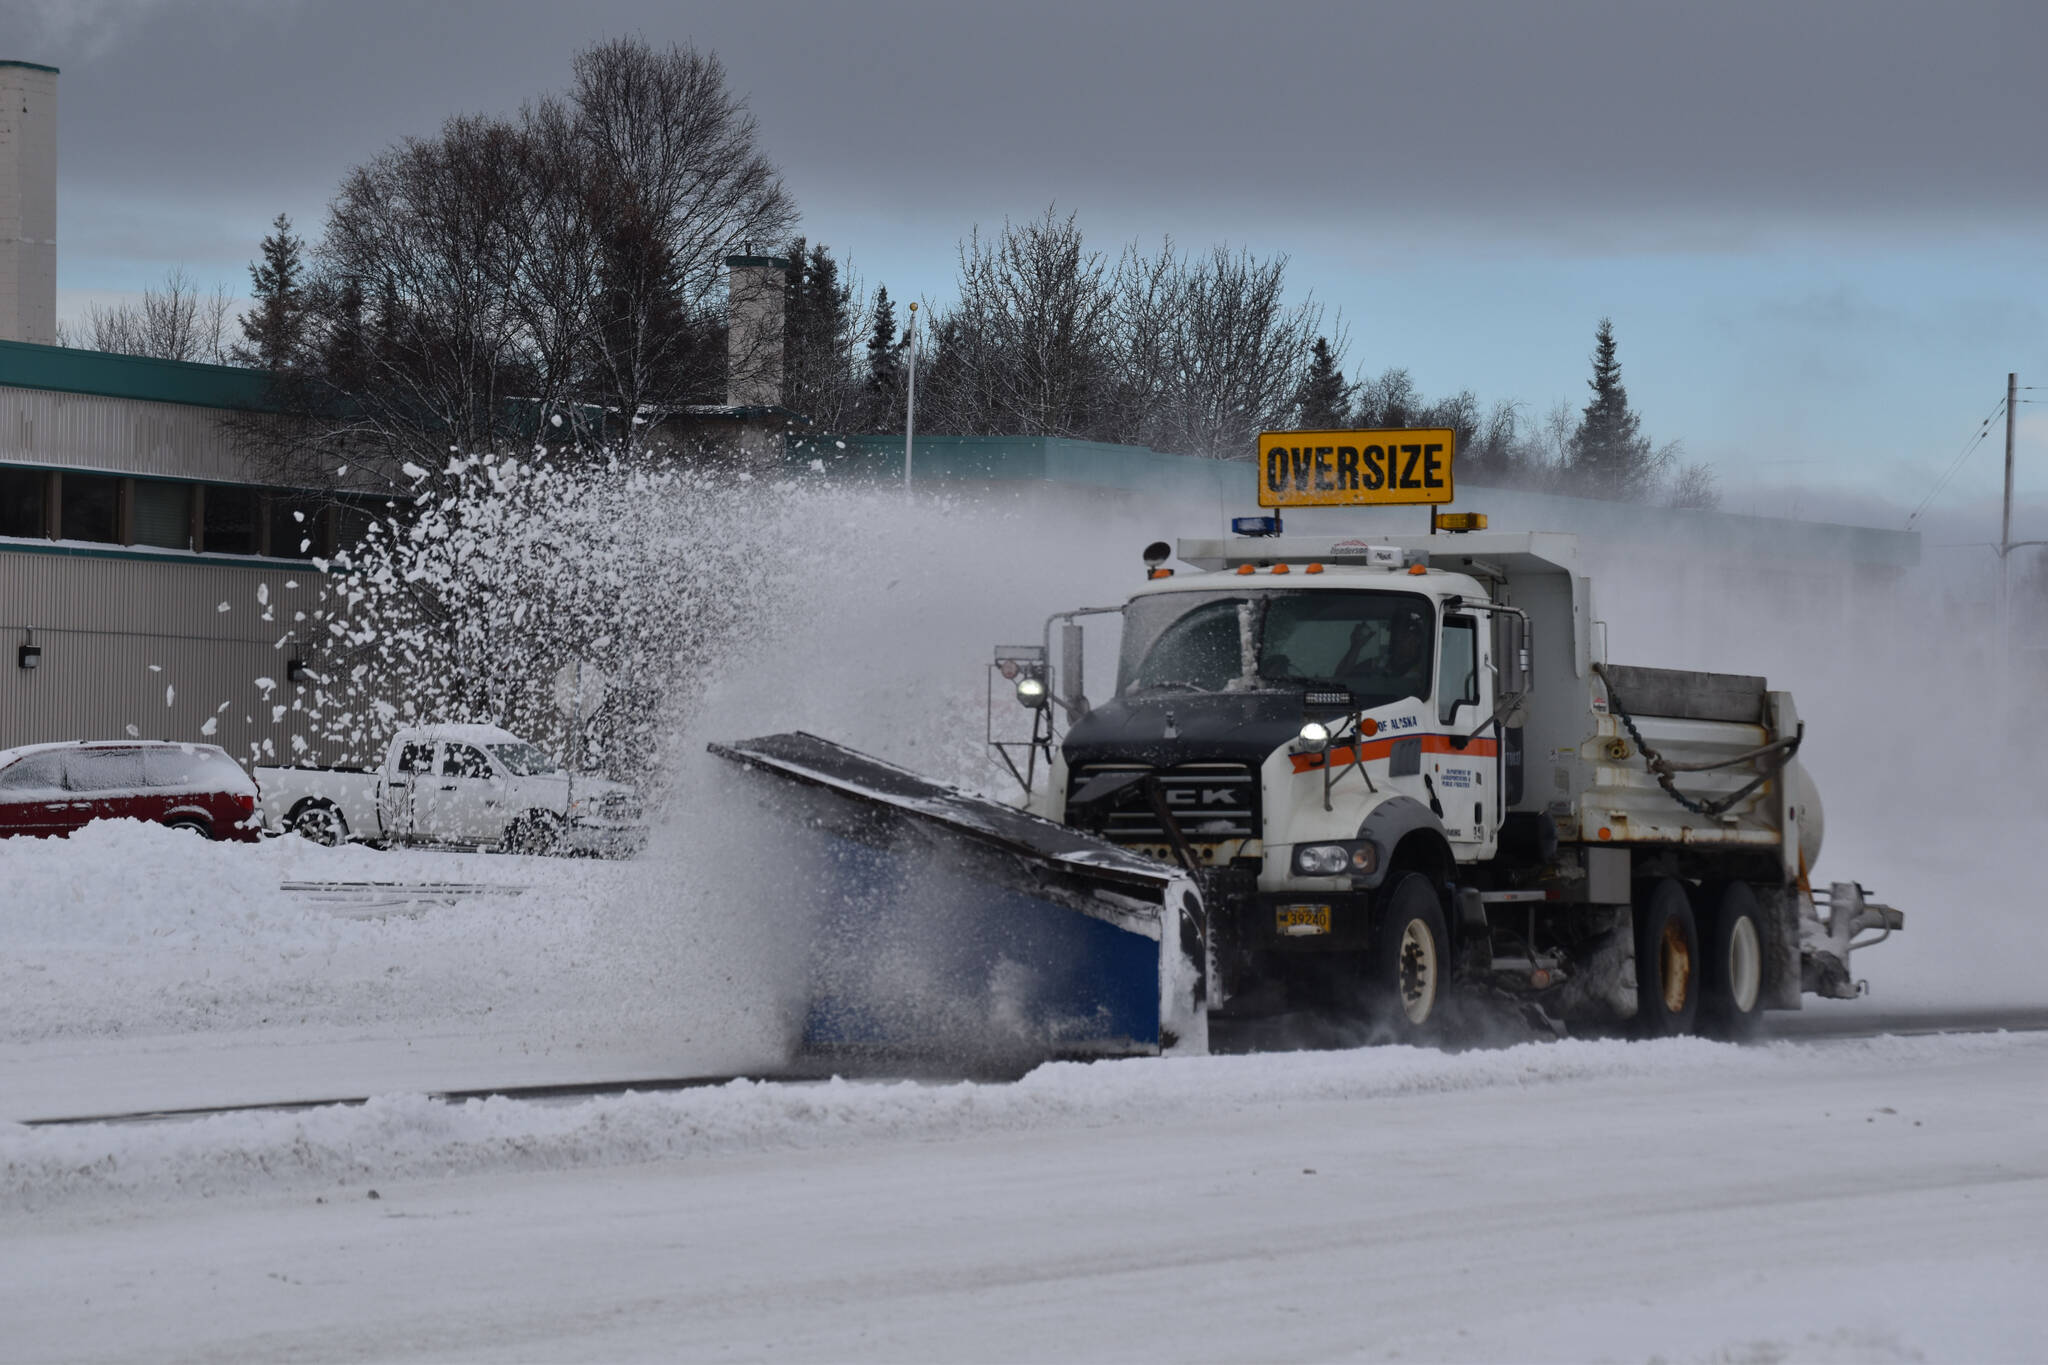 A plow truck clears snow as it moves down the Kenai Spur Highway in Kenai, Alaska on Wednesday, Oct. 26, 2022. (Jake Dye/Peninsula Clarion)